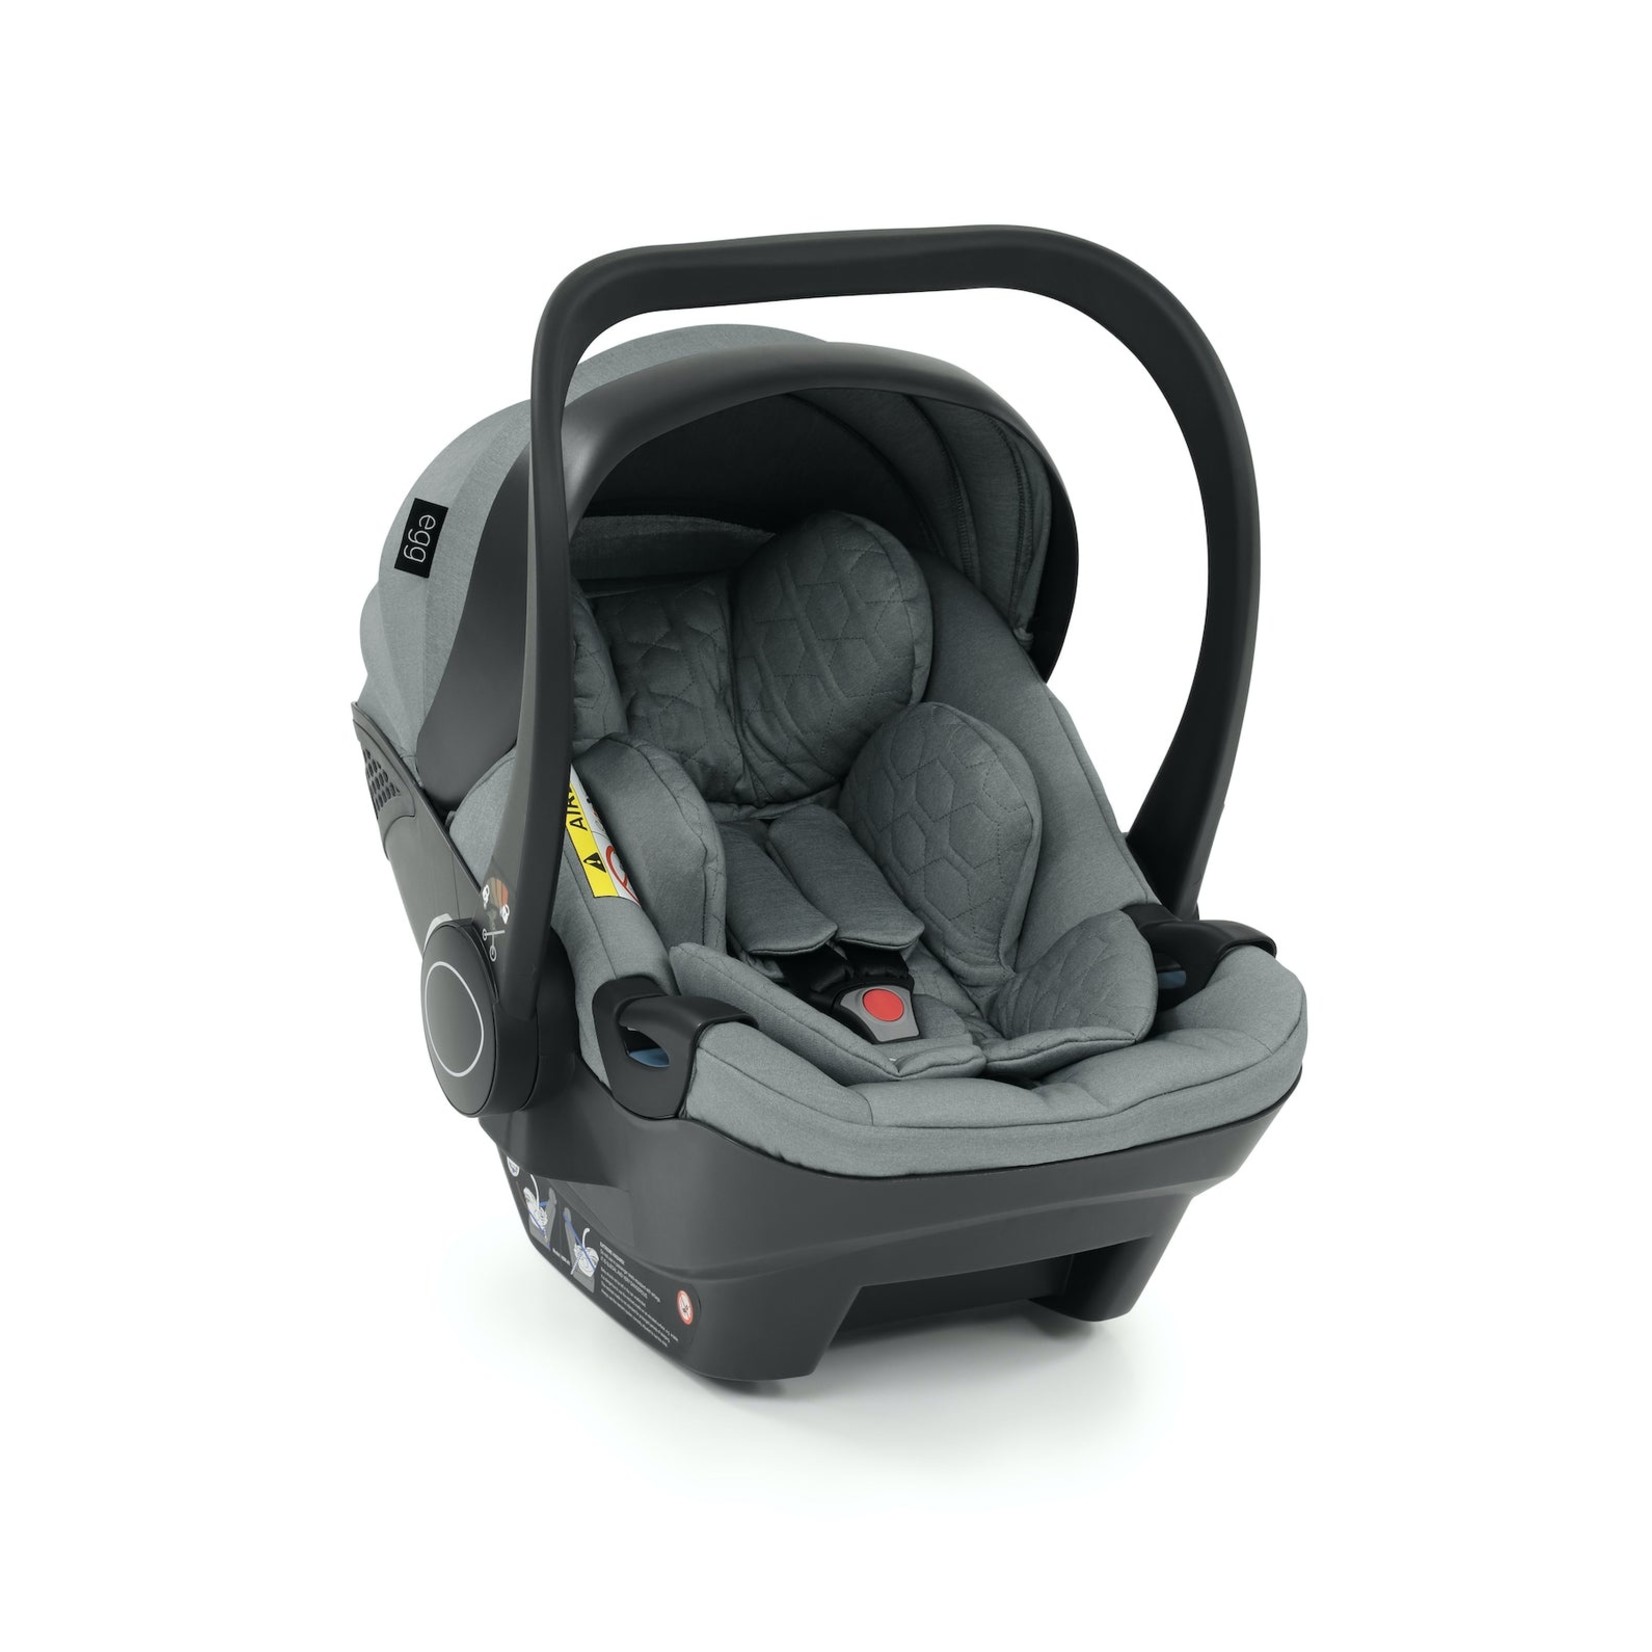 EGG EGG 2 ( 2 IN 1 ) INFANT CARSEAT TRAVEL SYSTEM  inc. ISOFIX - MONUMENT GREY